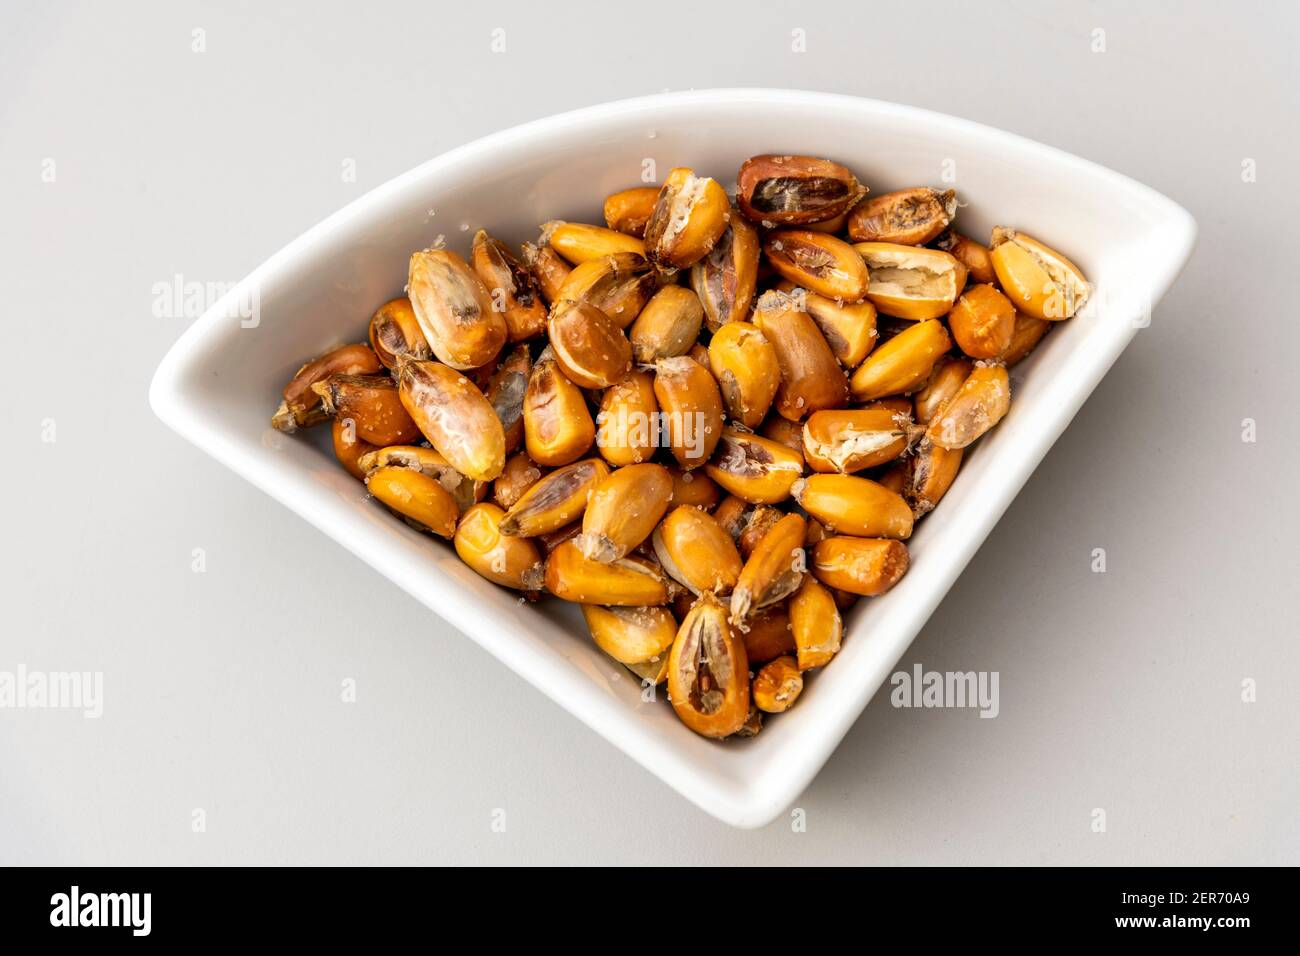 Peruvian corn nut known also as cancha served as a small appetizer plate Stock Photo